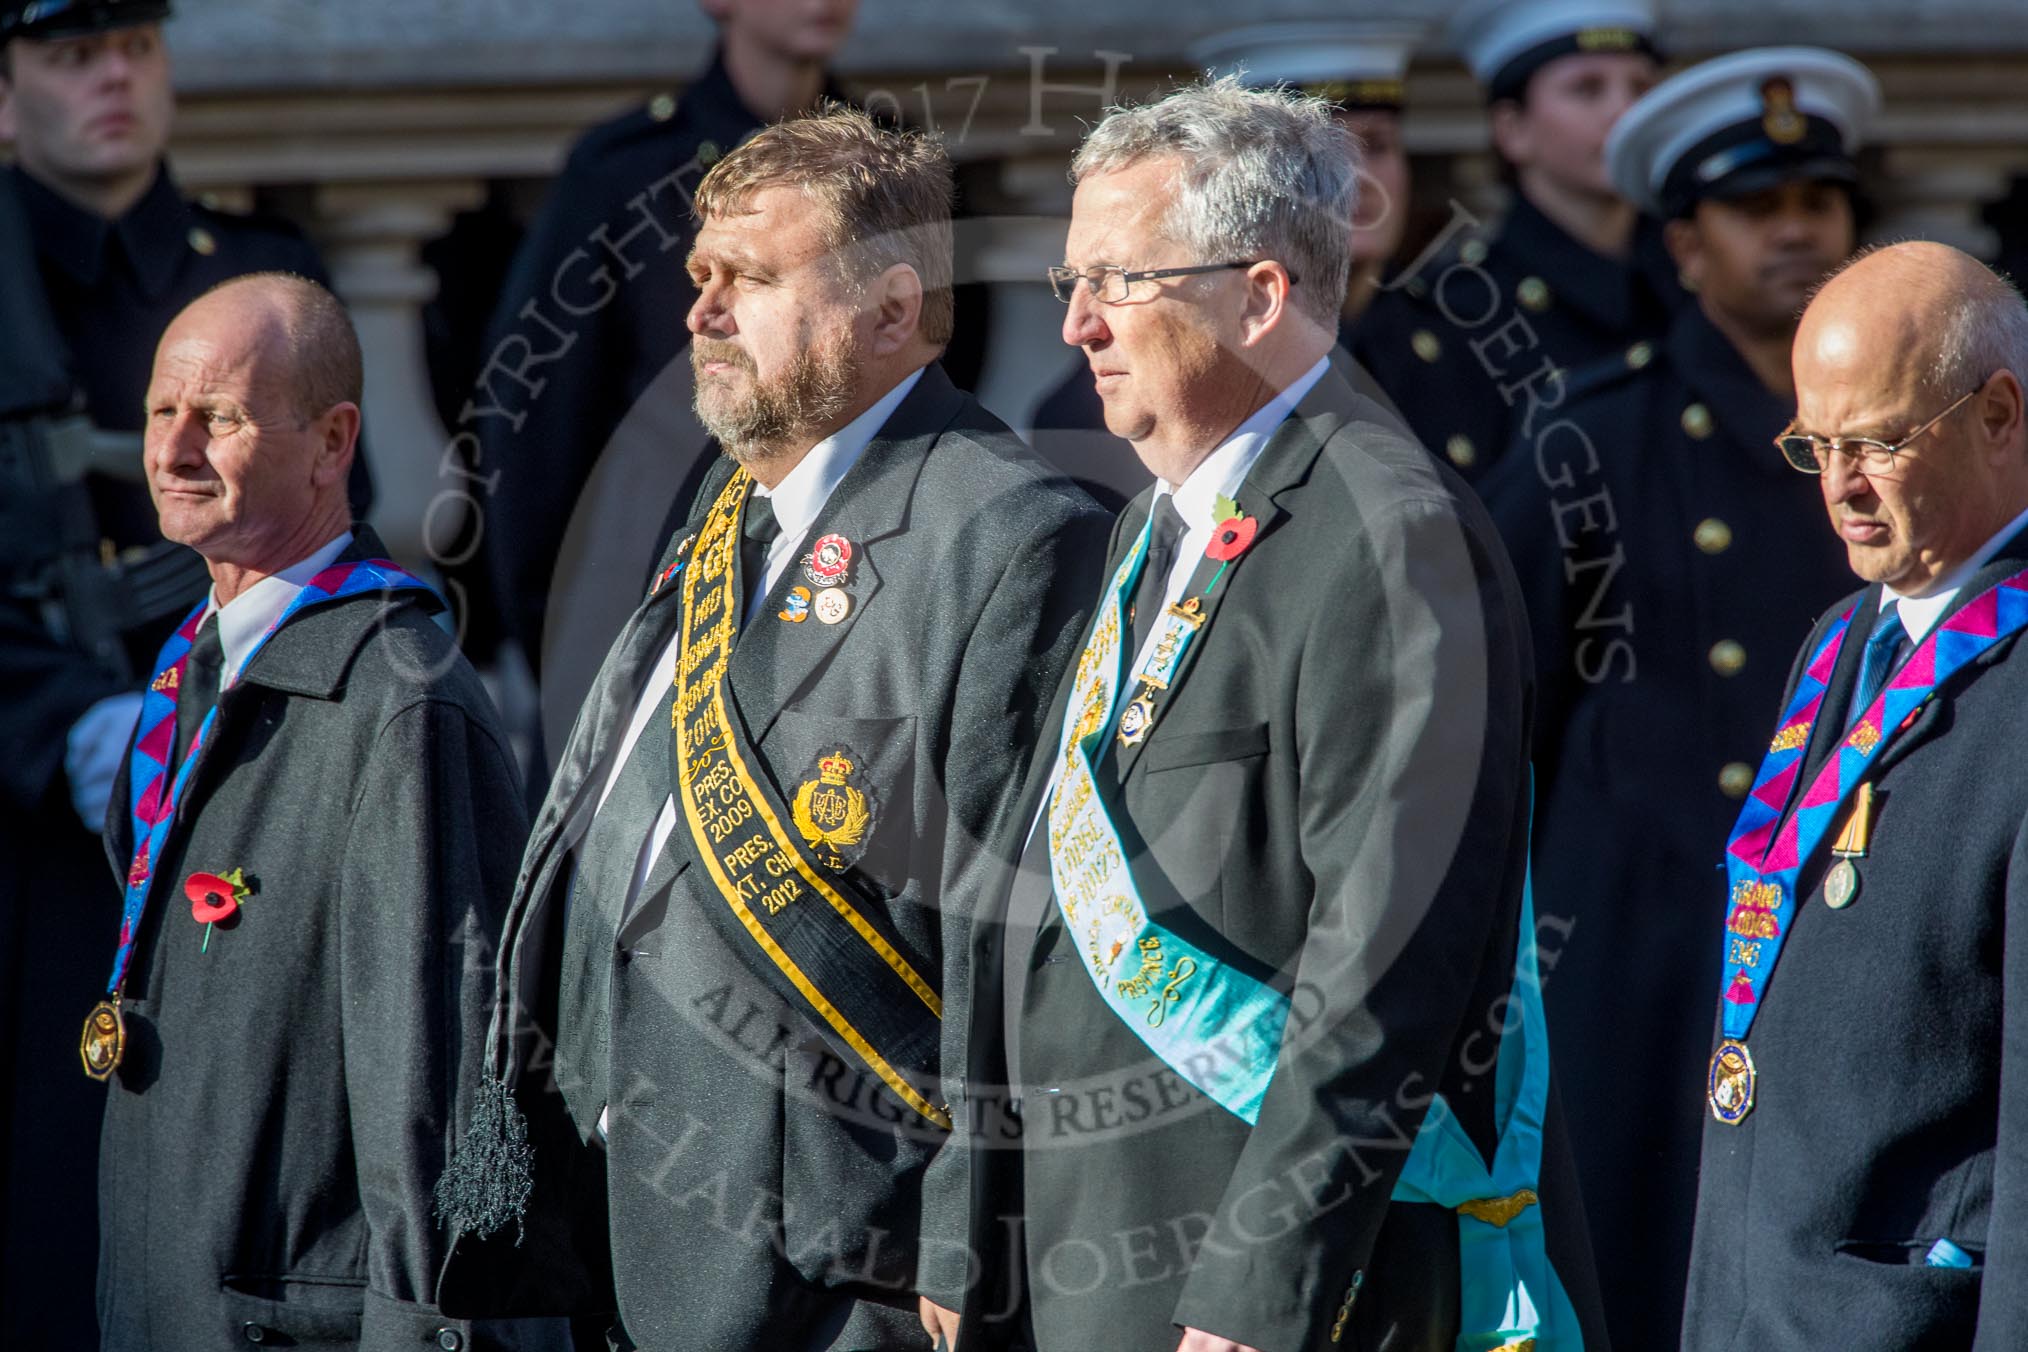 The Royal Antediluvian Order of Buffaloes (Group D24, 12 members) during the Royal British Legion March Past on Remembrance Sunday at the Cenotaph, Whitehall, Westminster, London, 11 November 2018, 12:24.